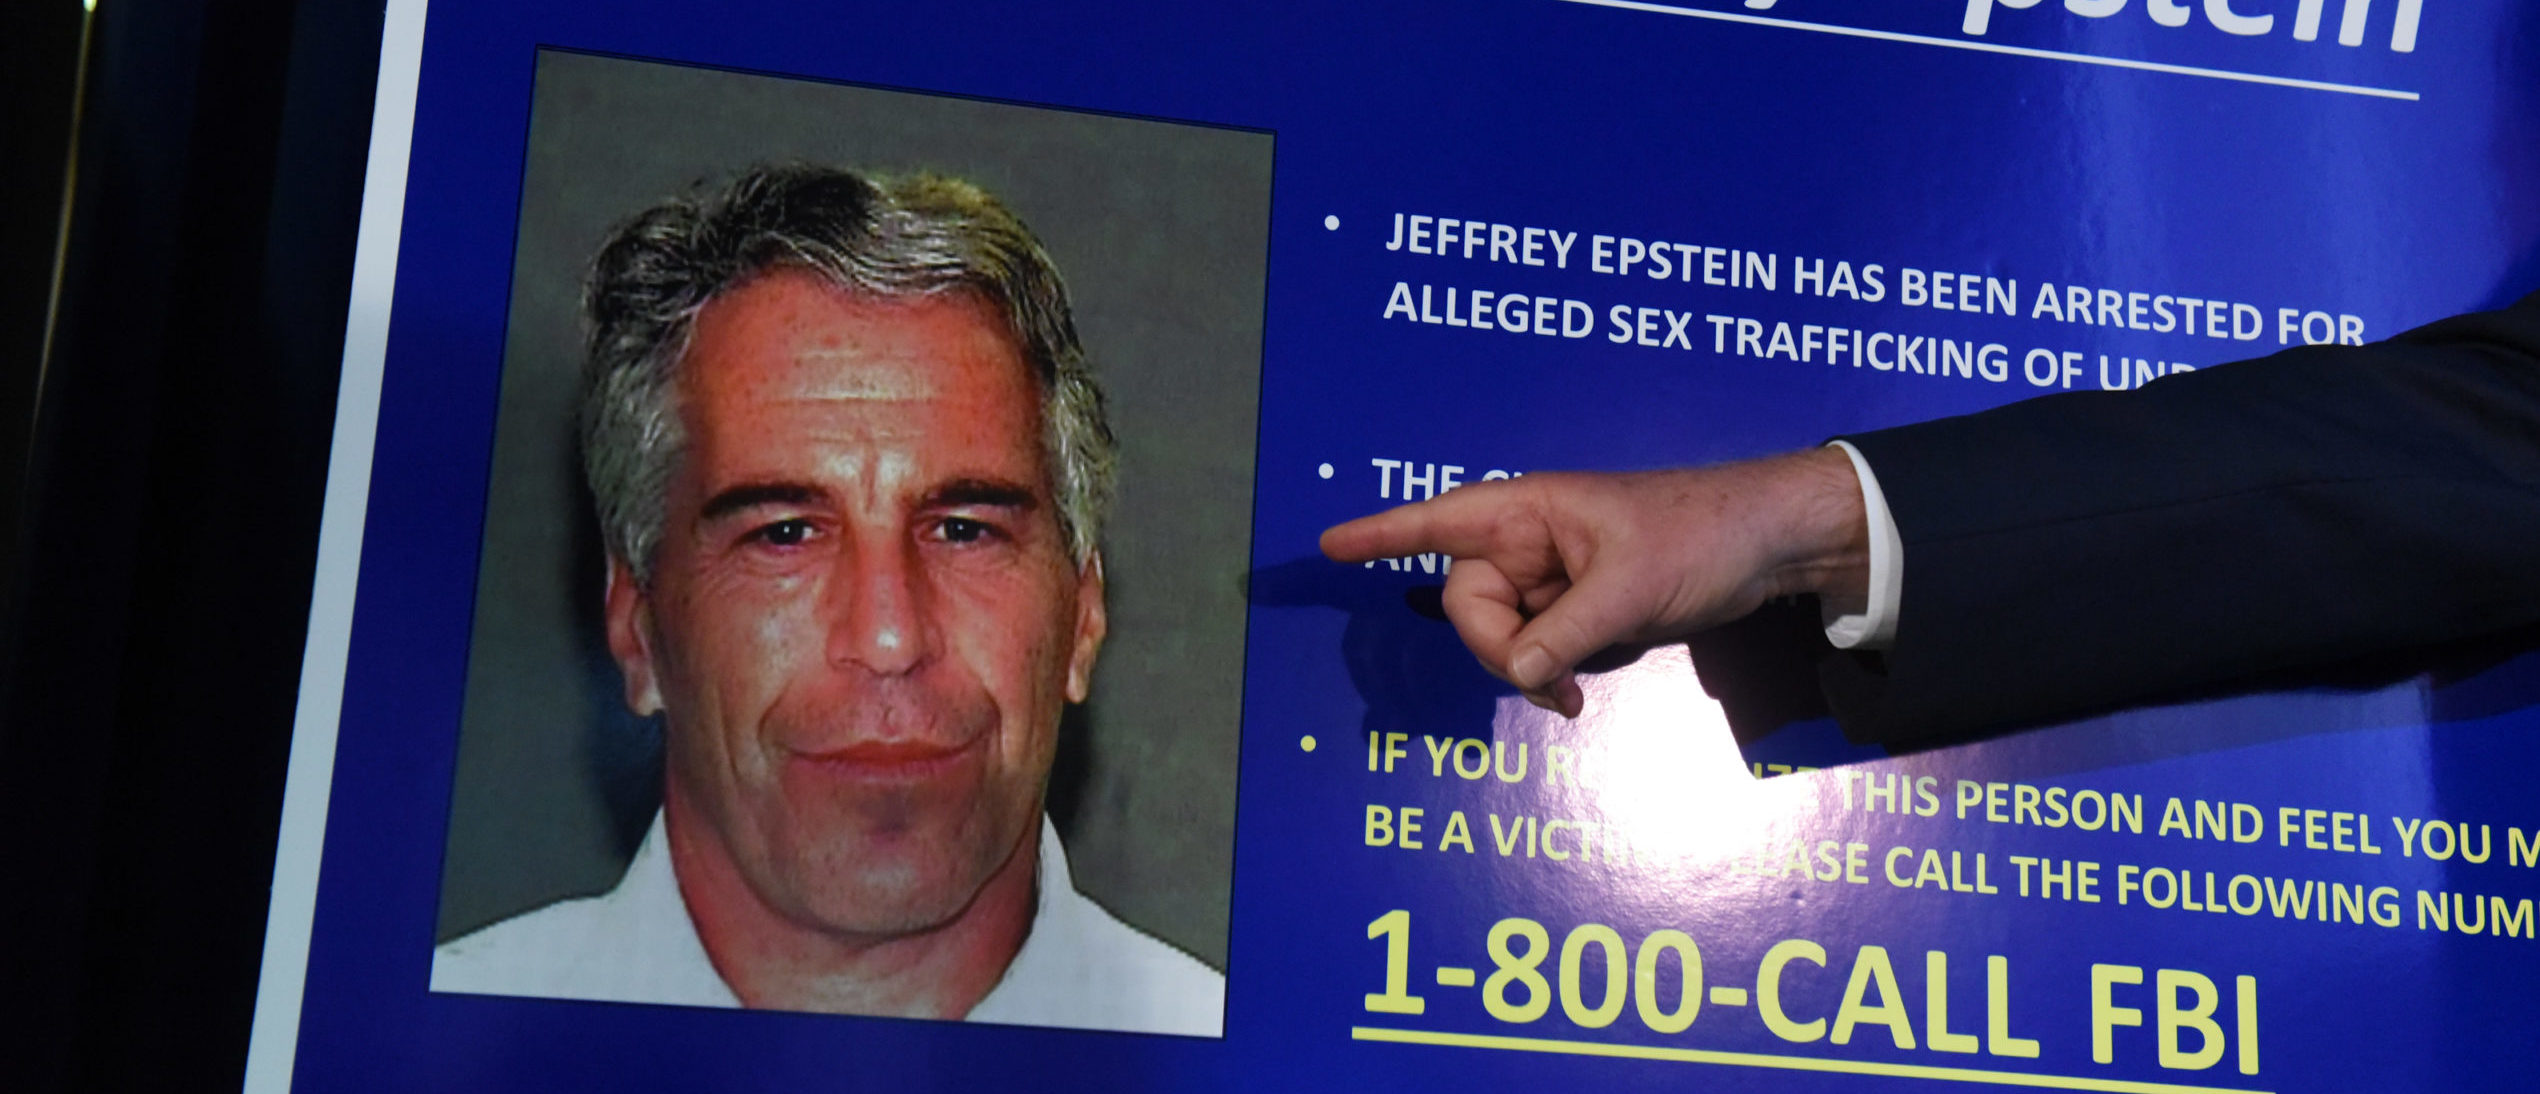 US Attorney for the Southern District of New York Geoffrey Berman announces charges against Jeffery Epstein on July 8, 2019 in New York City. Epstein will be charged with one count of sex trafficking of minors and one count of conspiracy to engage in sex trafficking of minors. (Photo by Stephanie Keith/Getty Images)